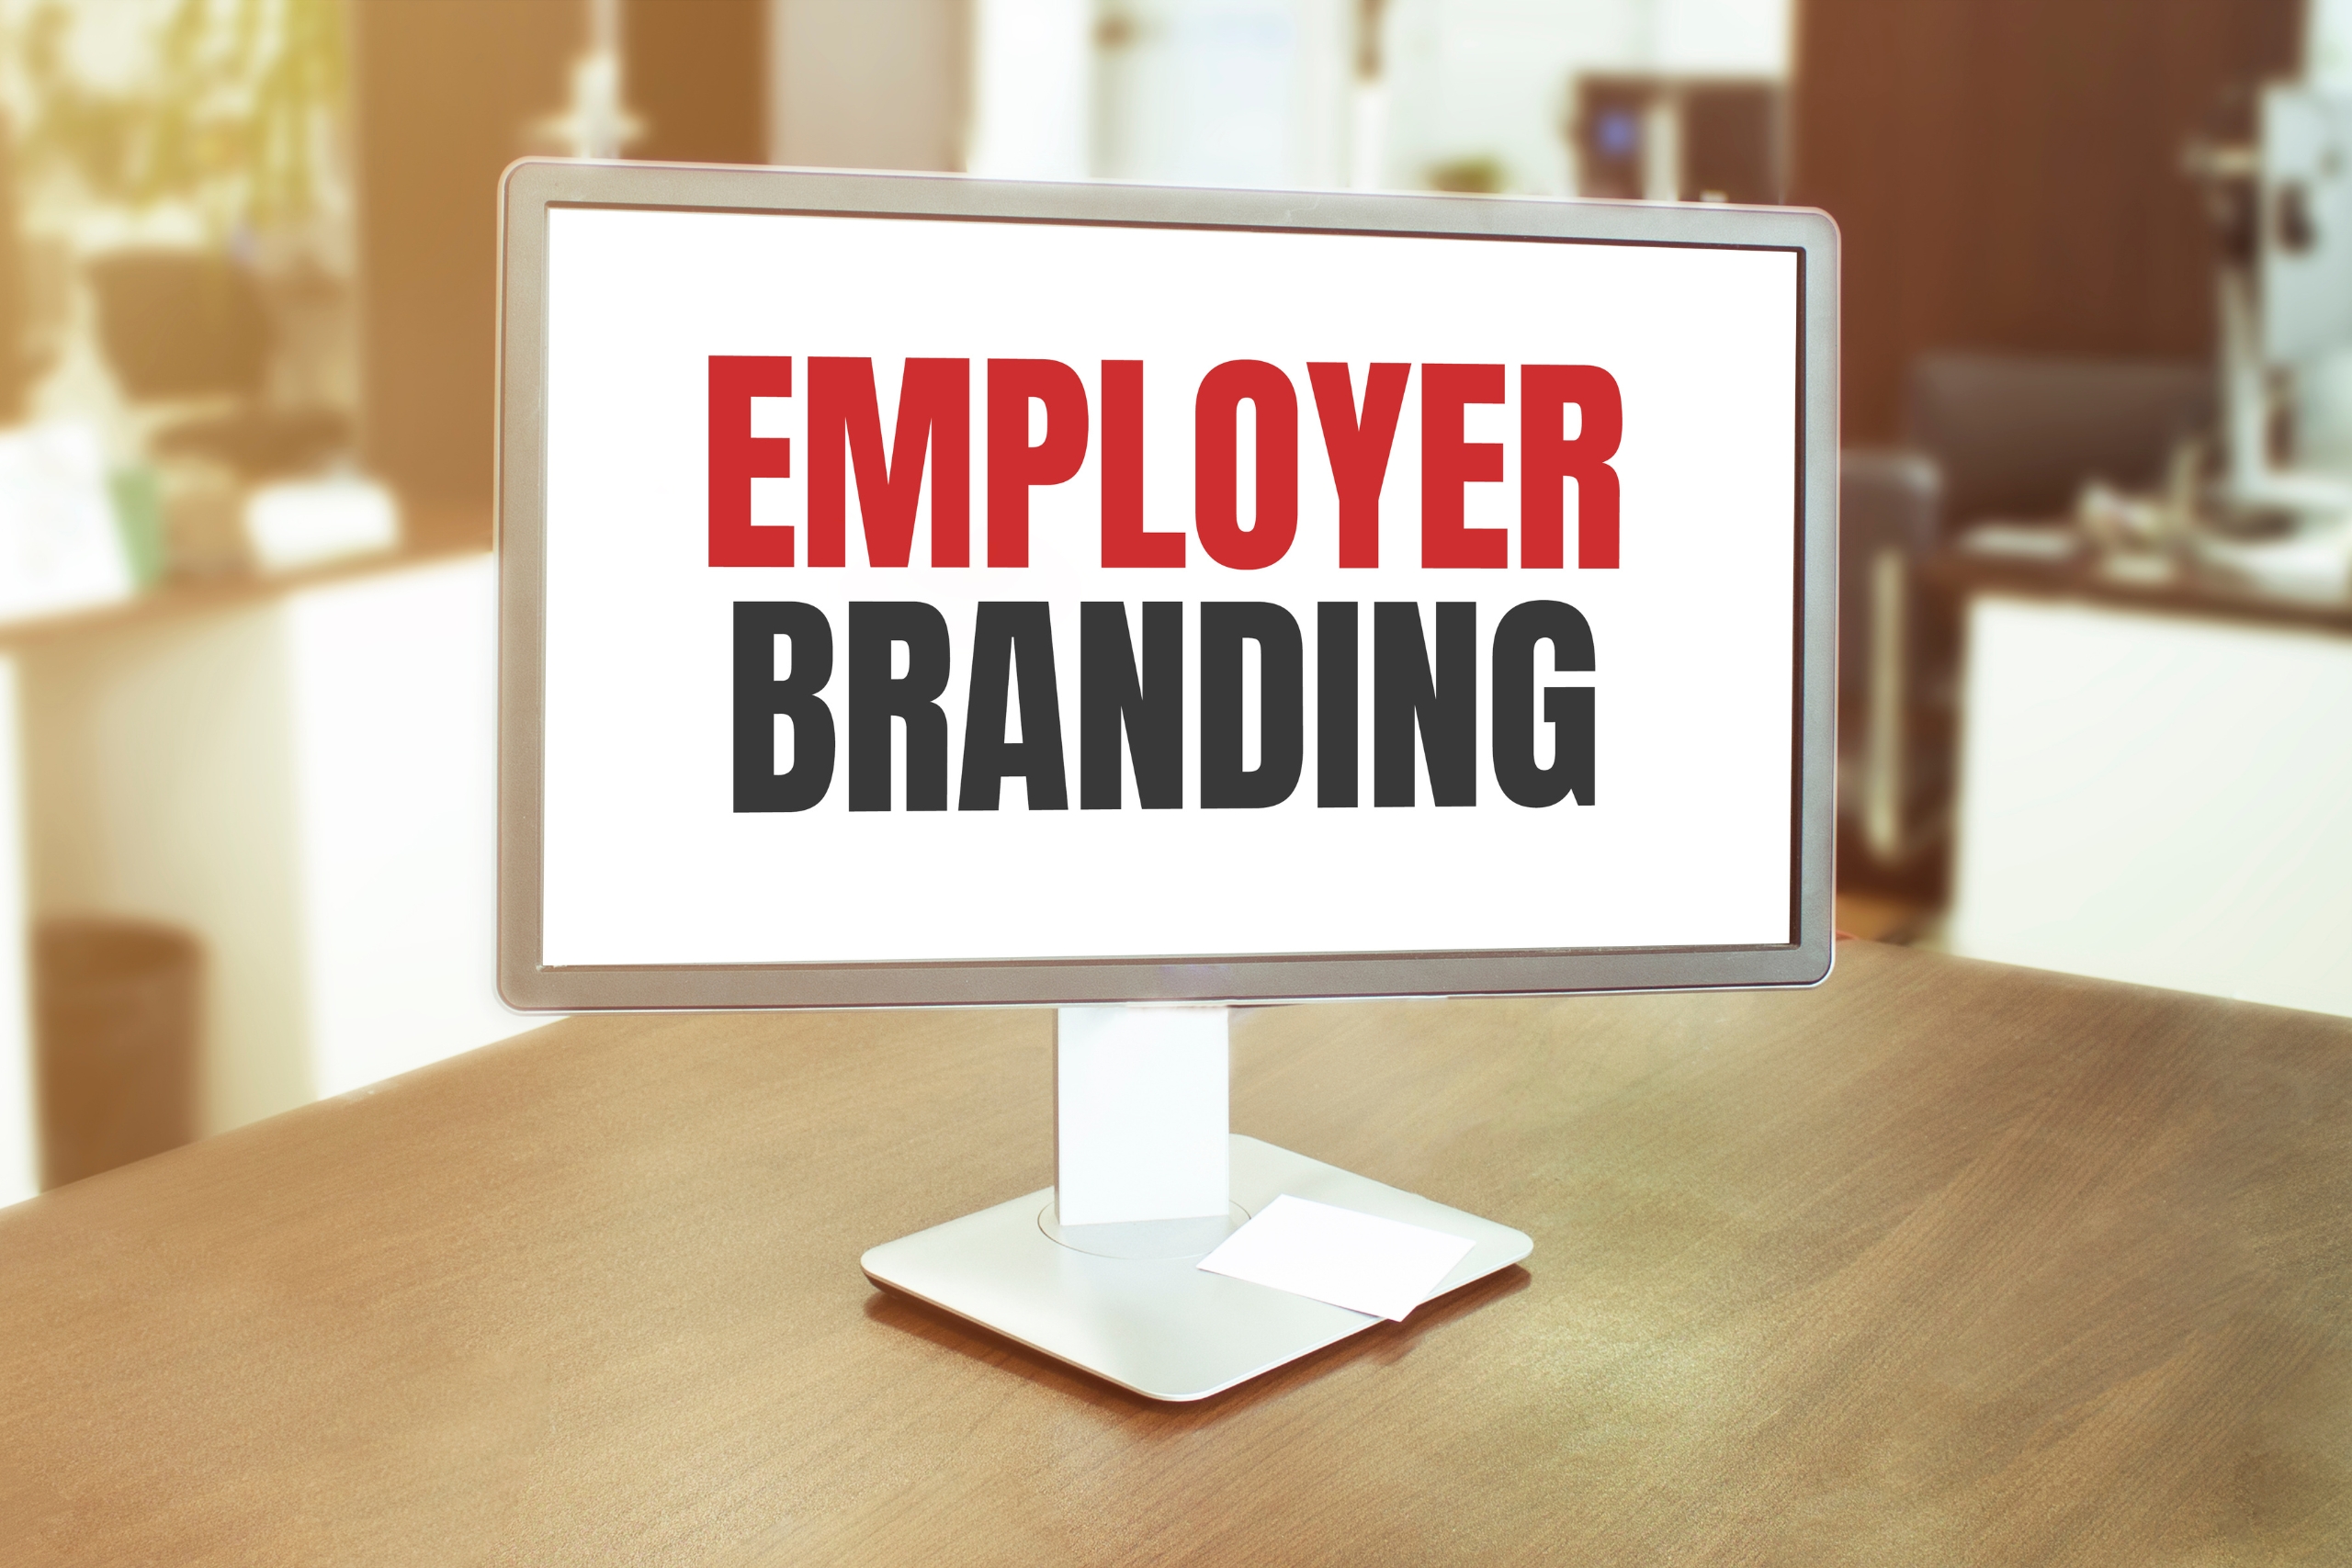 What Is The Objective Of Employee Branding?